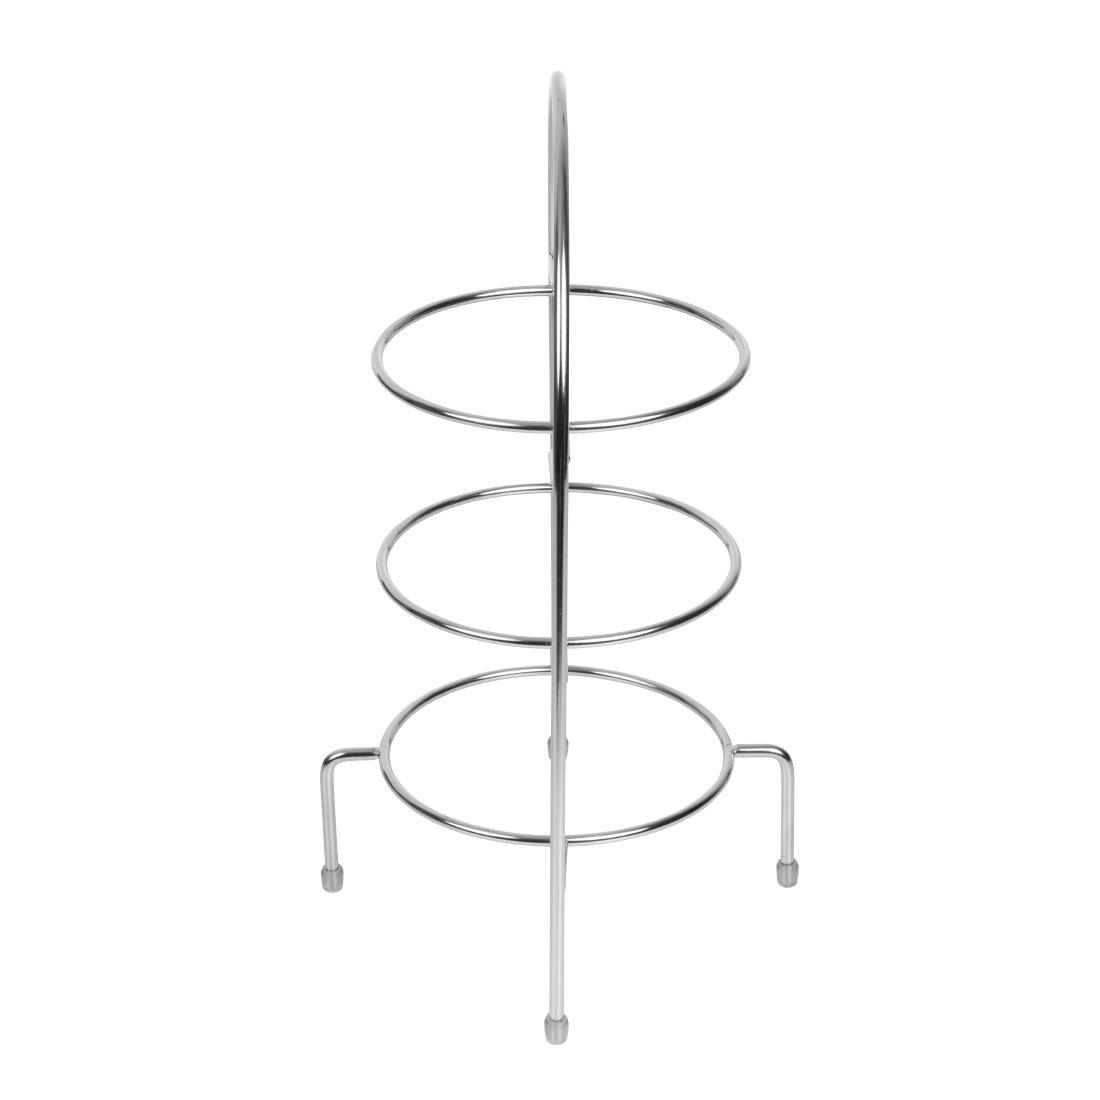 Olympia CL572 Olympia Plate Stand for 3x Plates up to 10 1/2" - HospoStore